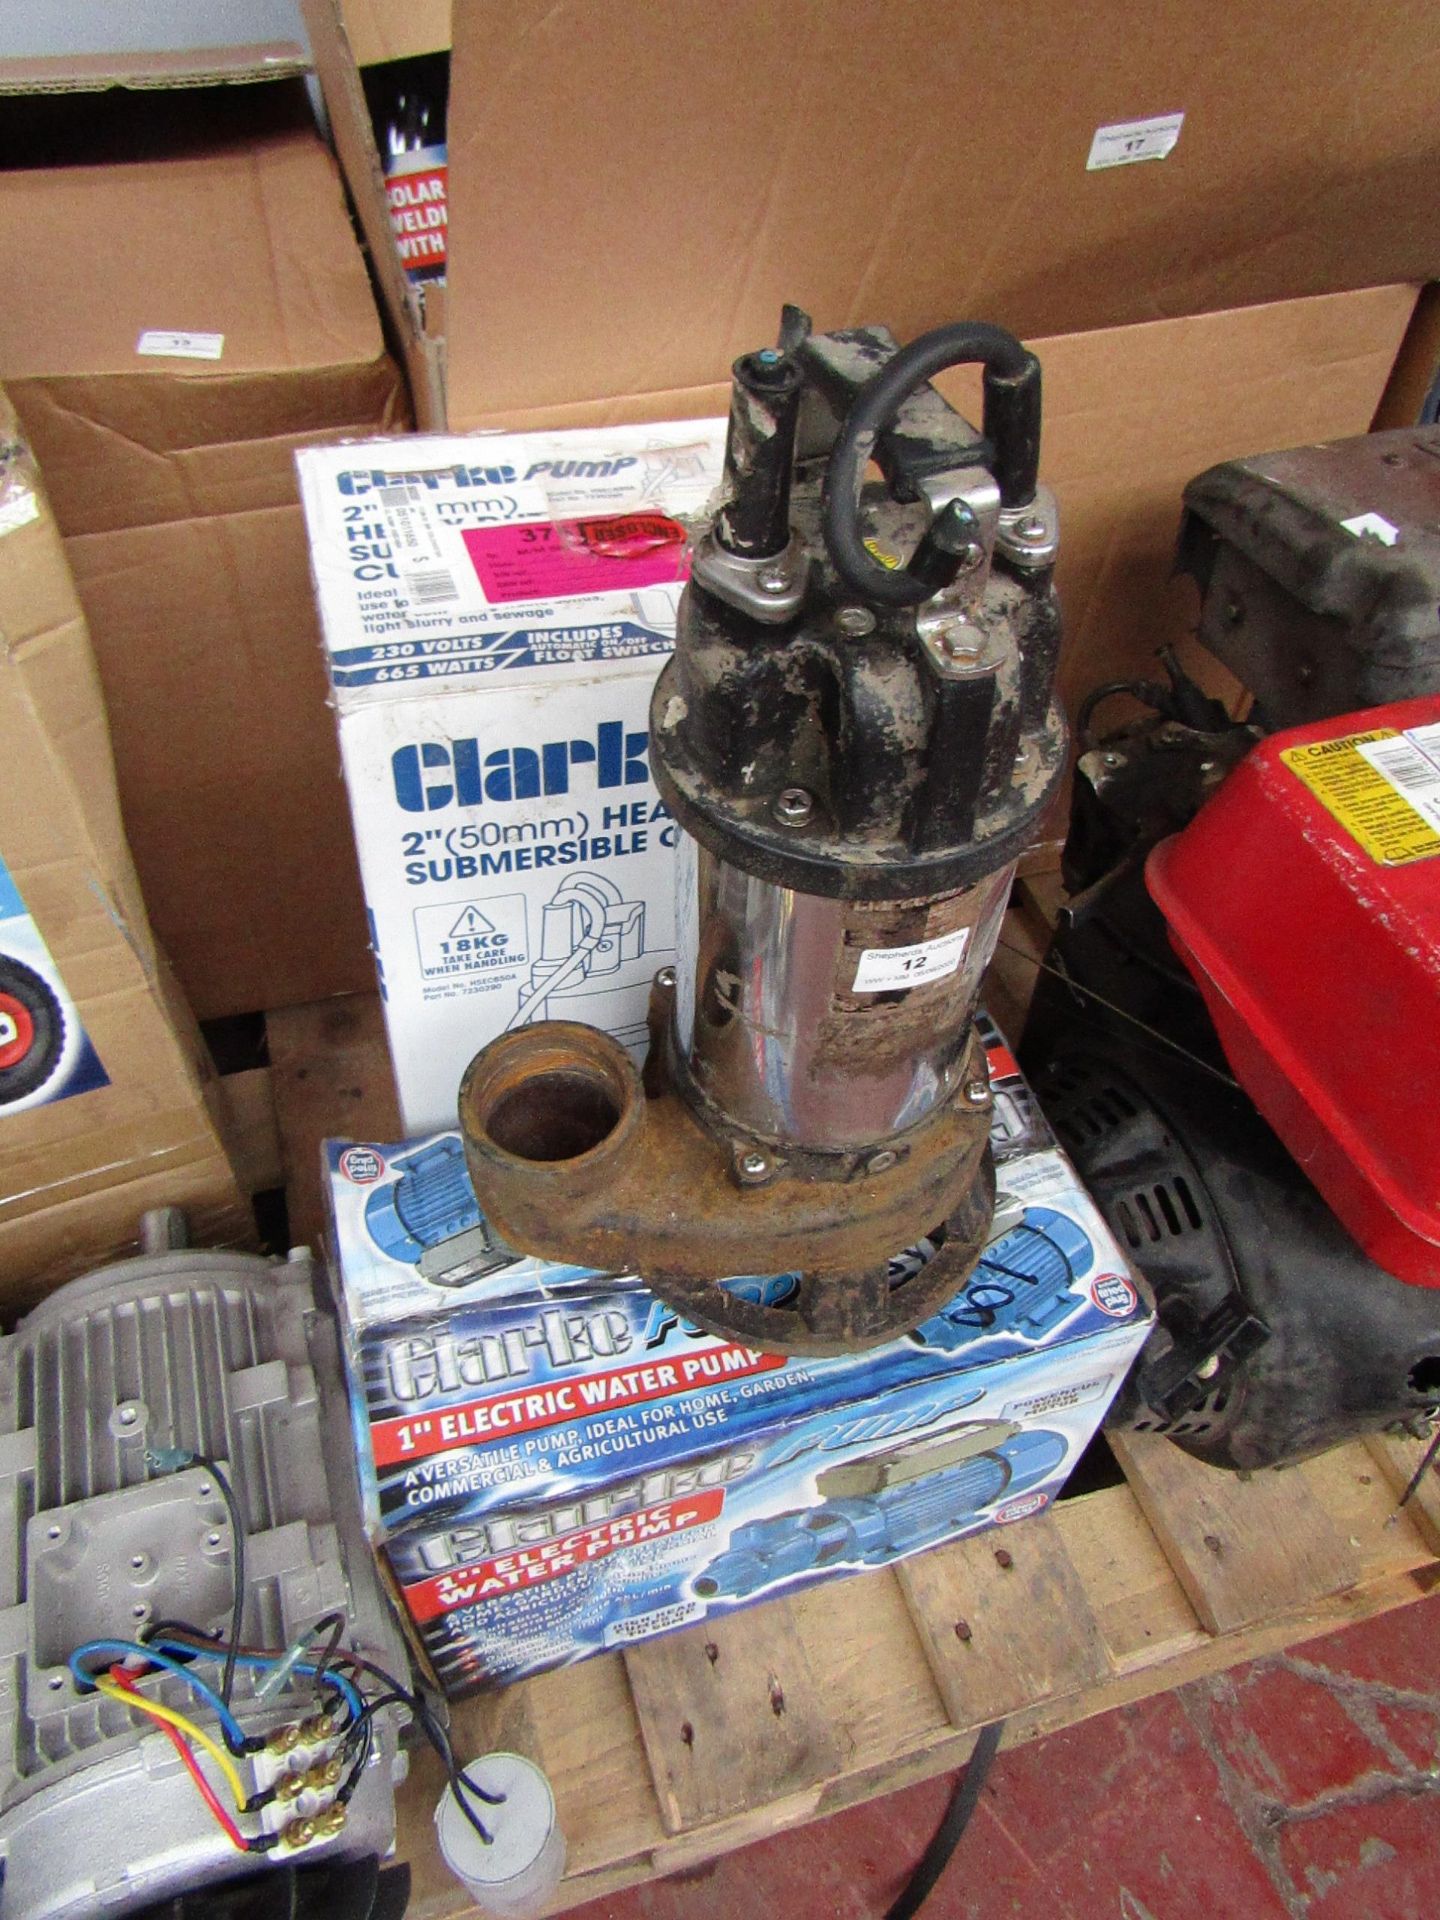 1x CL PUMP BIP1500 230V 8759, 1x CL PUMP HSEC650A 230 8759, 1x CL PUMP HSEC650A 230 8759, This lot